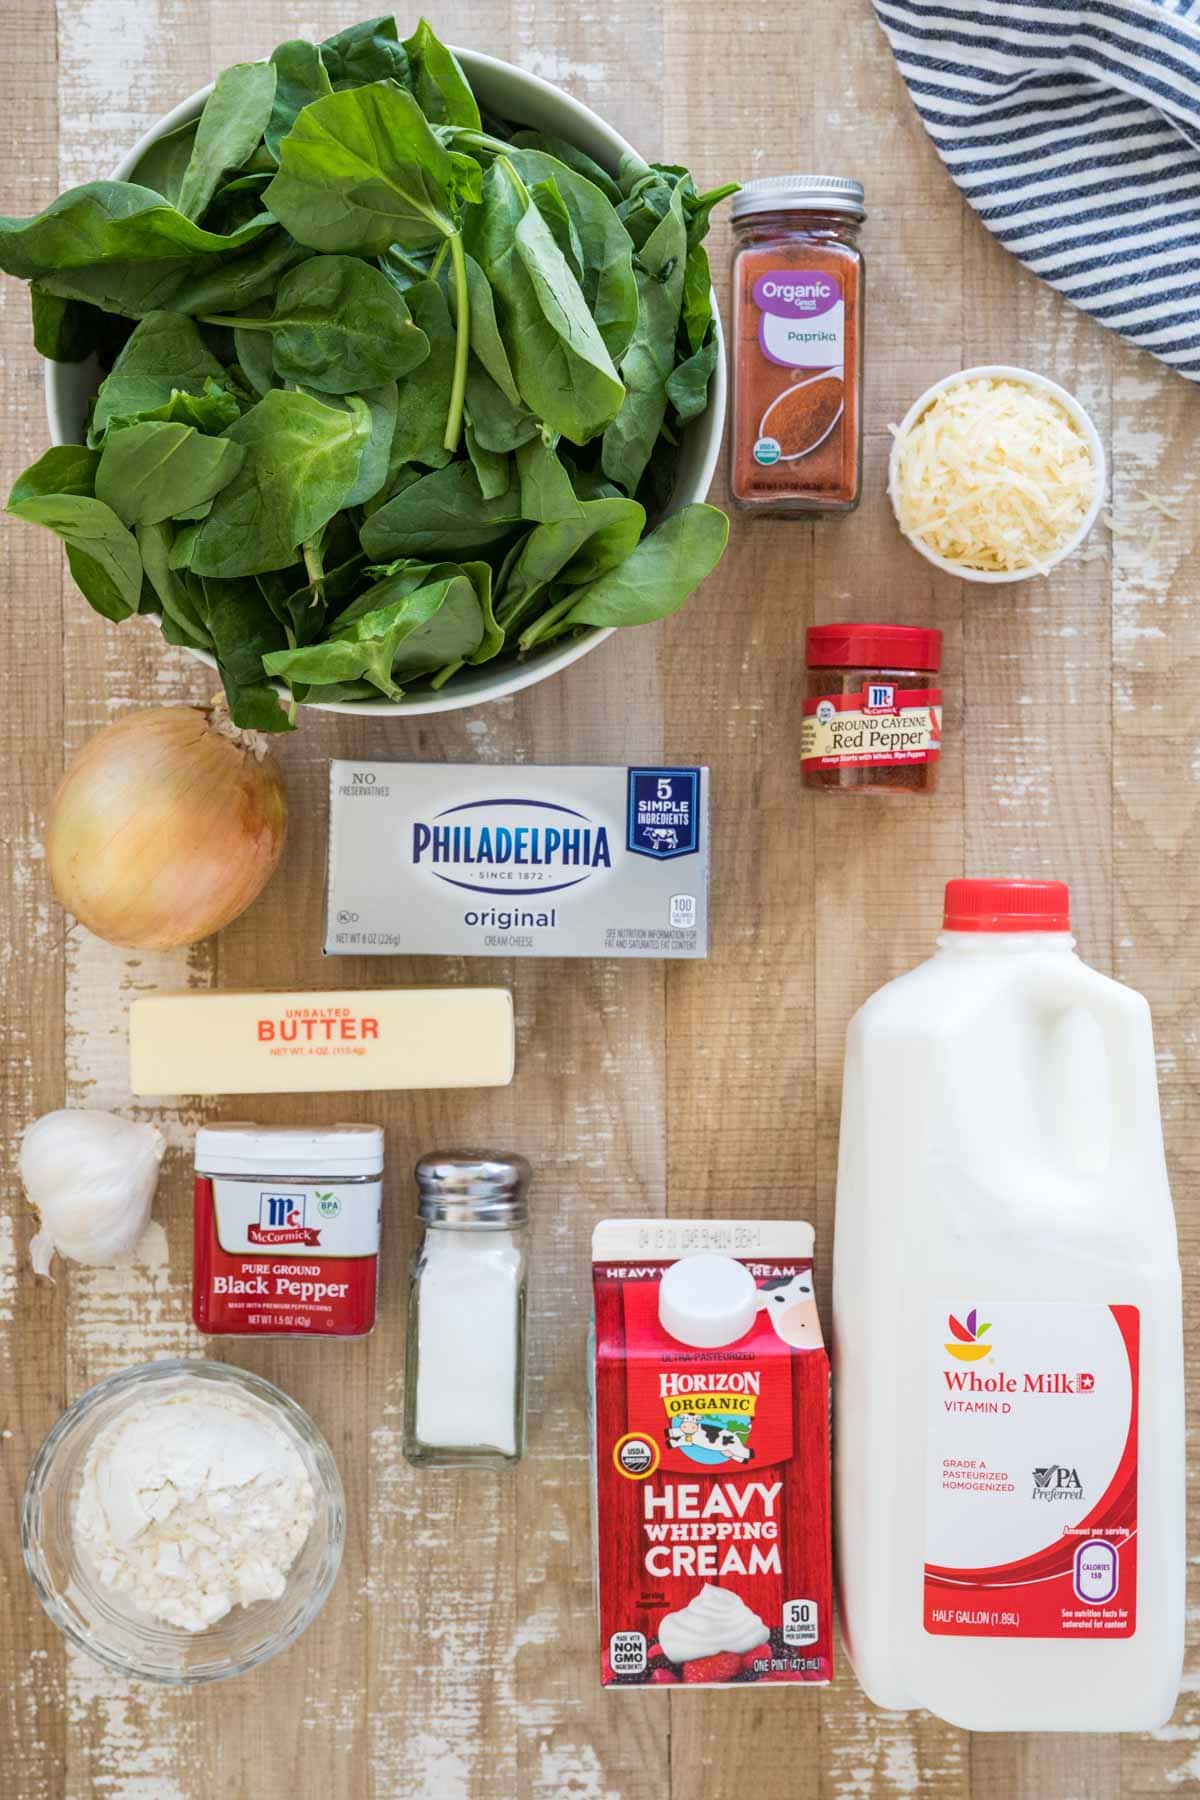 Ingredients for making creamed spinach